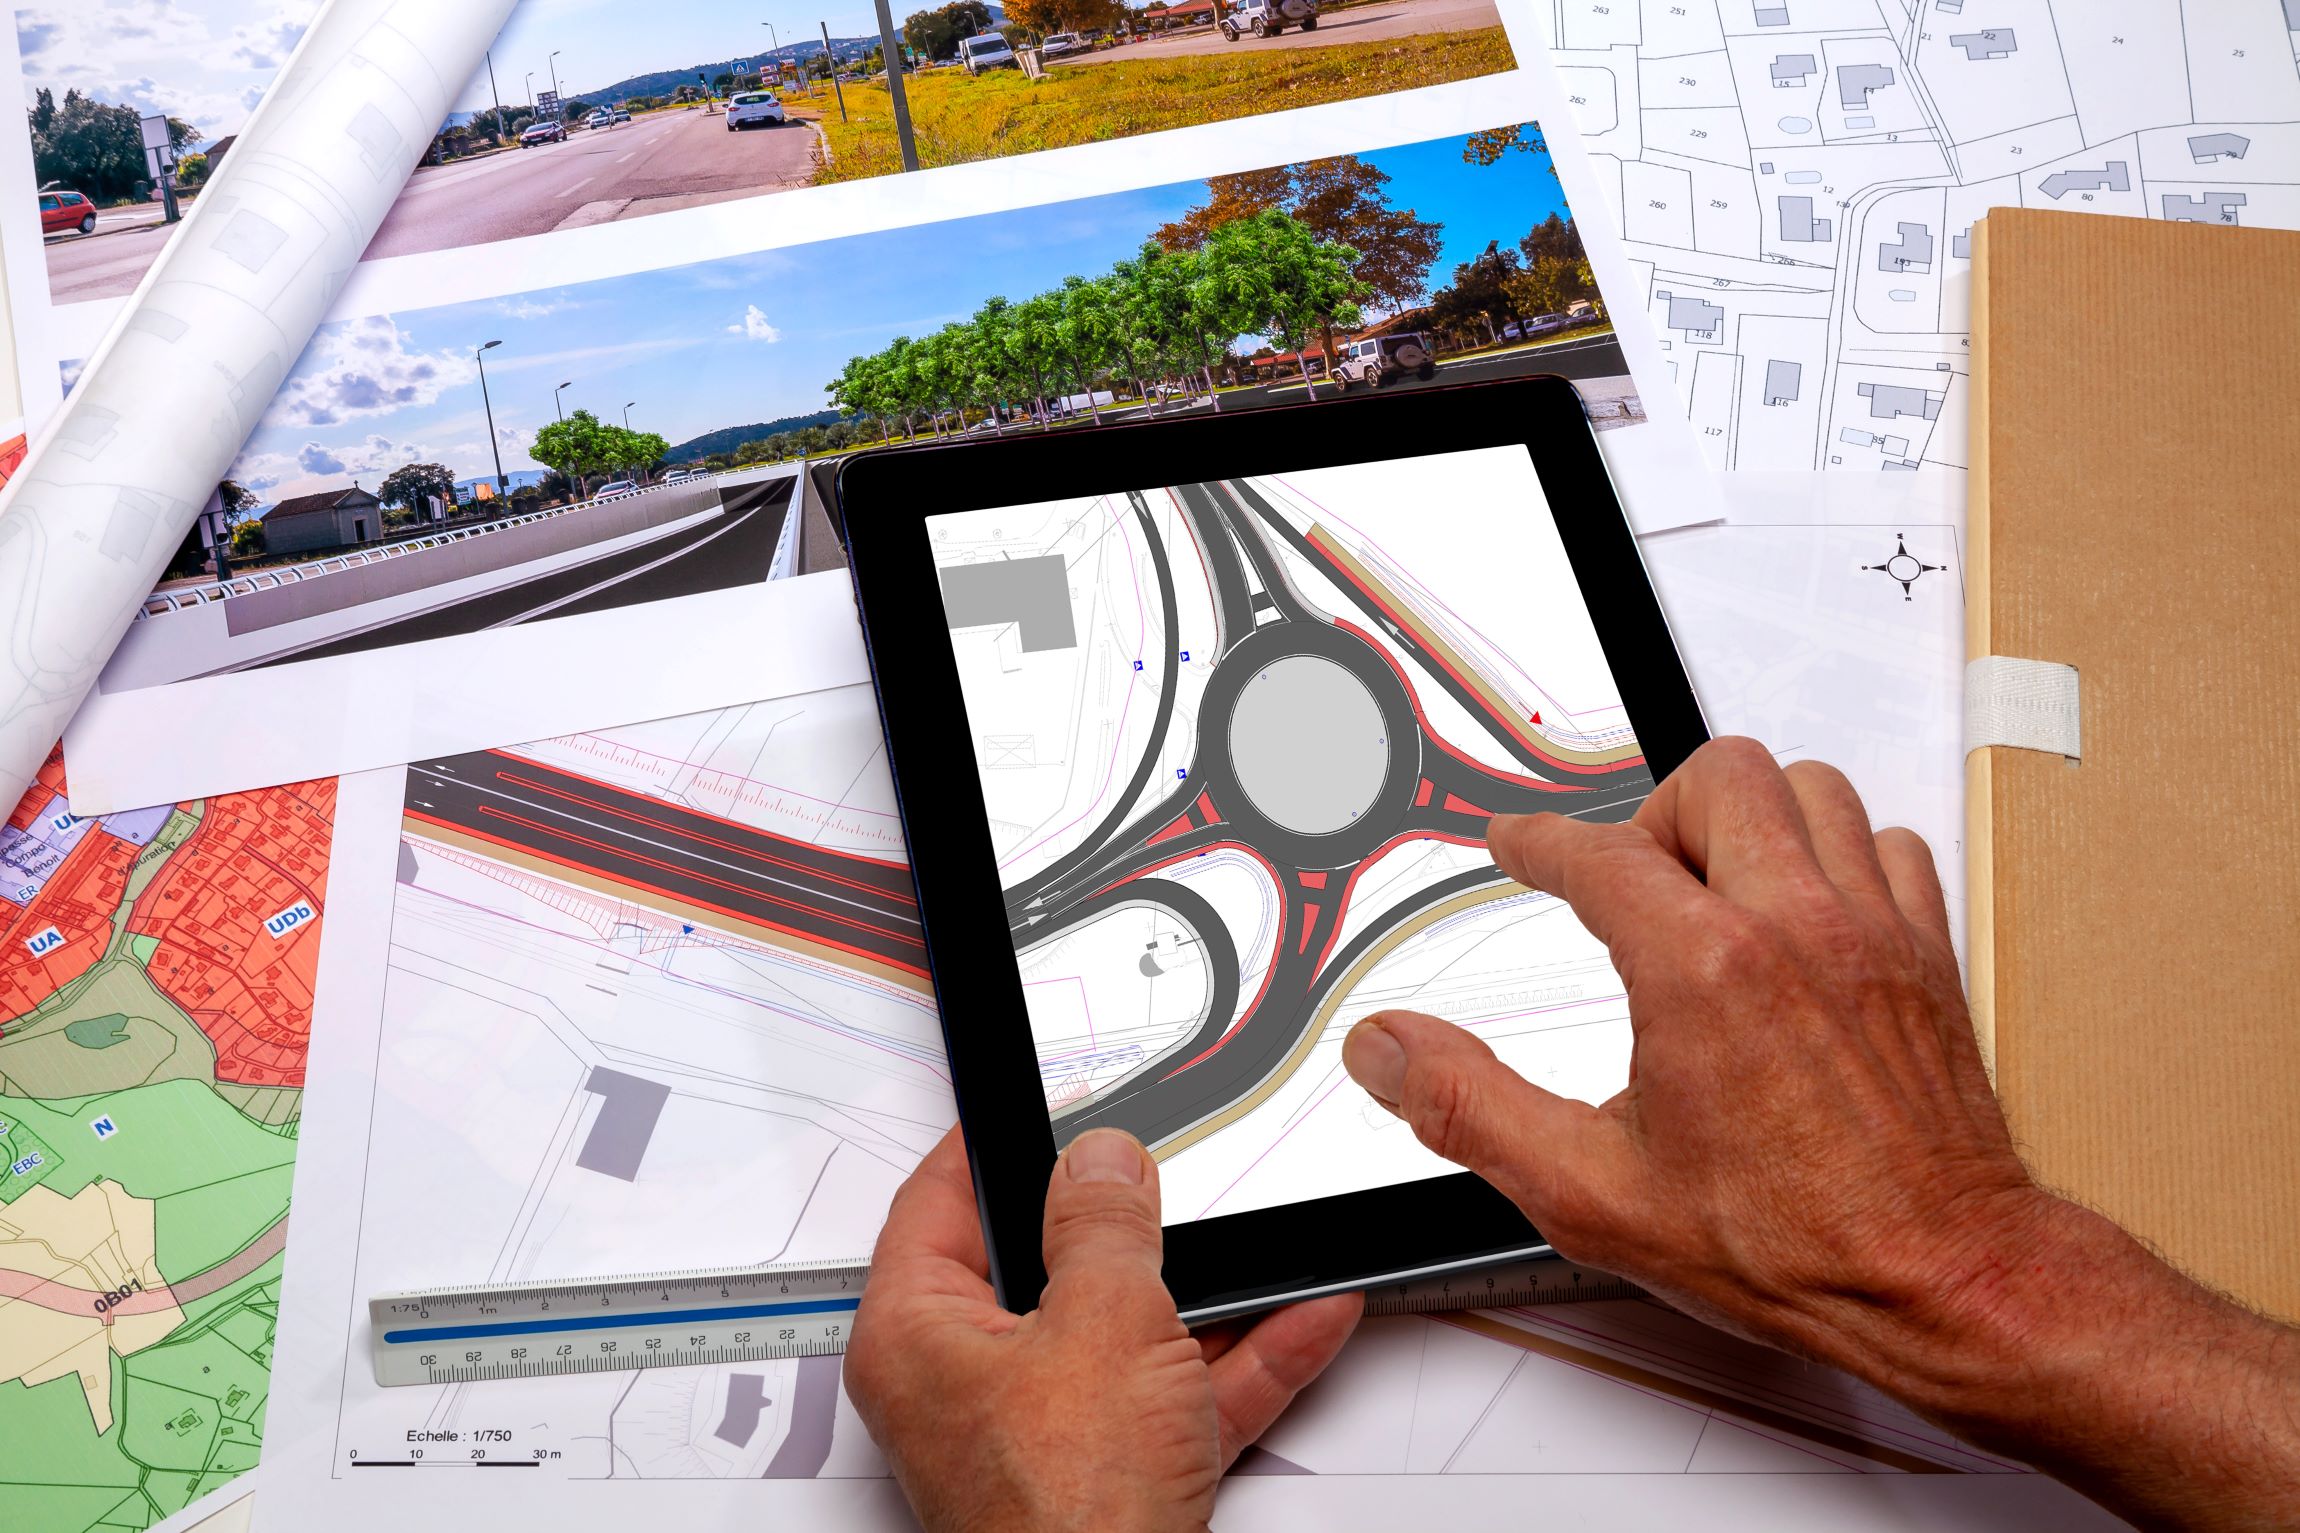 Town planning - Land use planning - Employee holding in his hands a digital tablet displaying a road project plan, above a desk where ground plan maps are placed